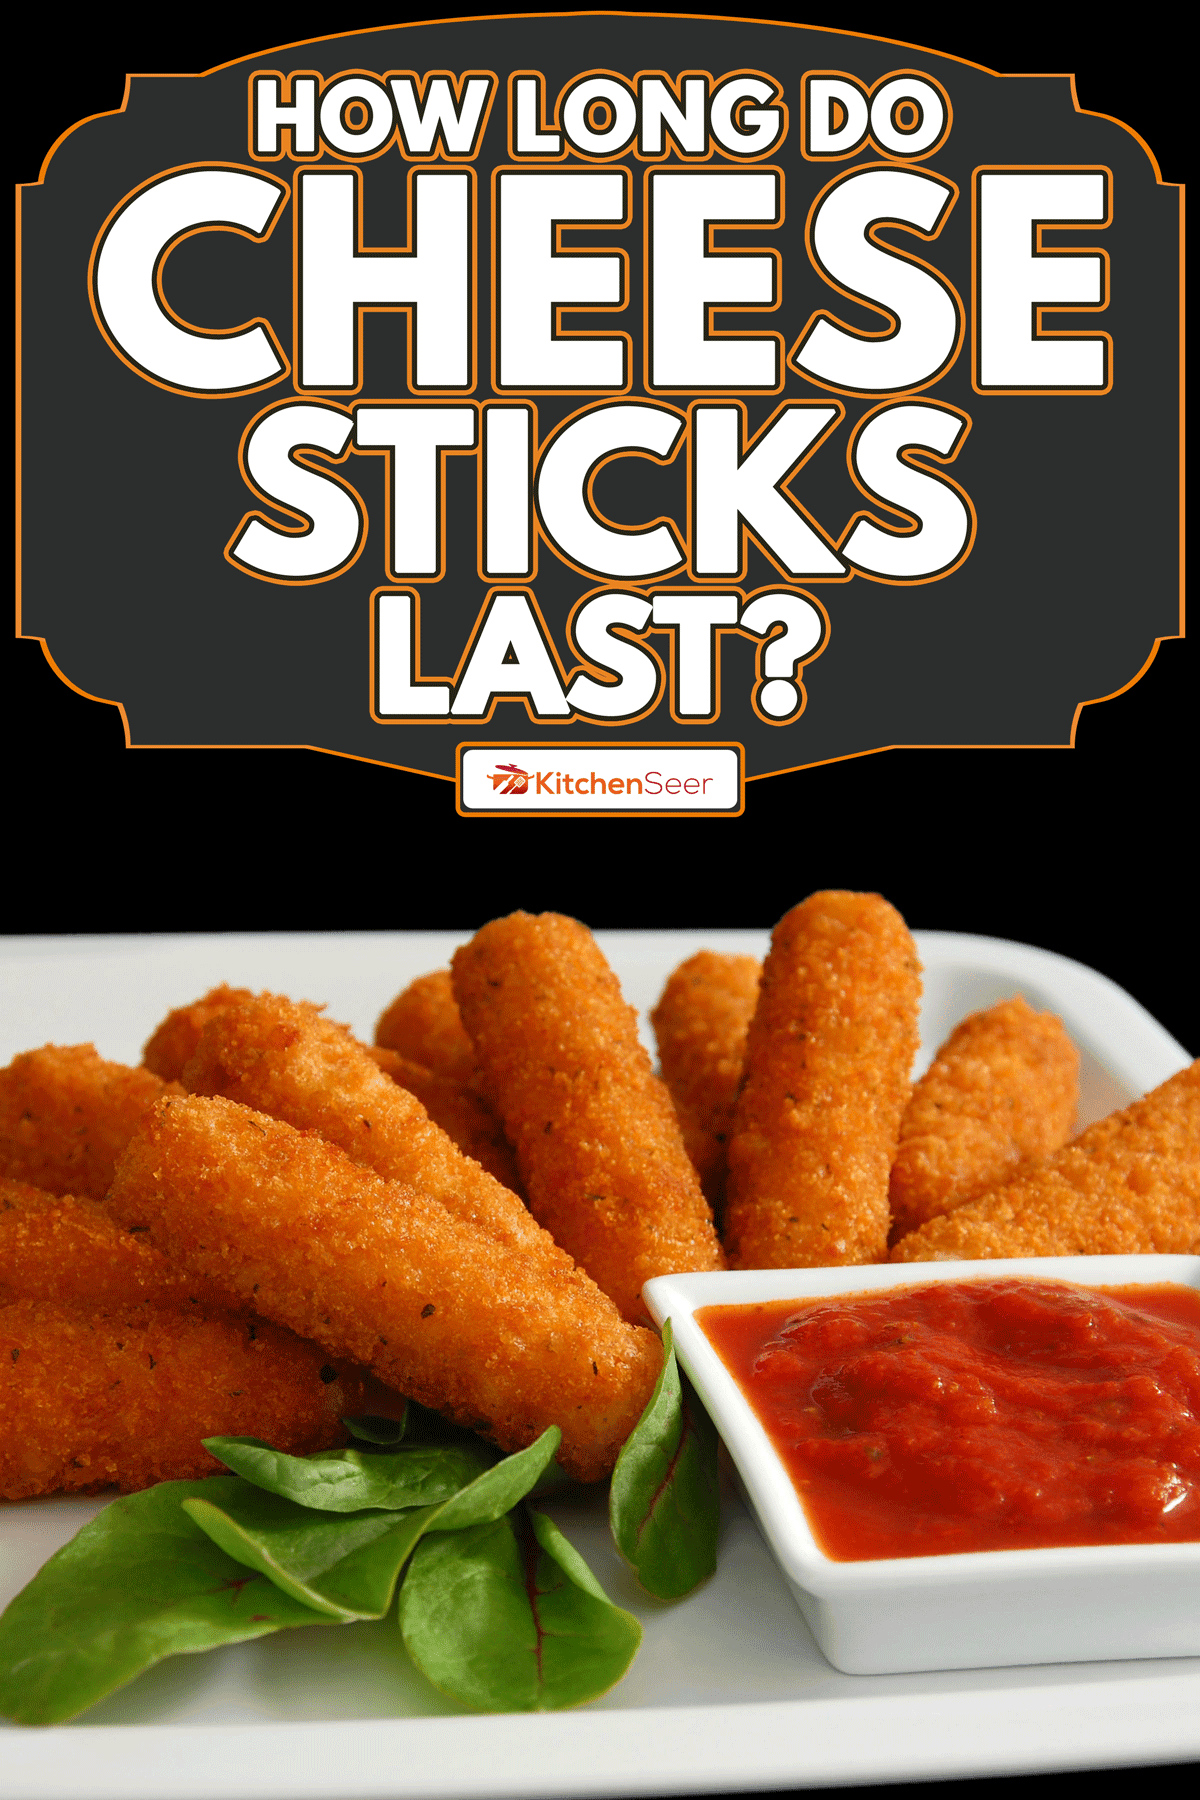 Fried mozzarella sticks with sauce dip and green leaves, How Long Do Cheese Sticks Last?